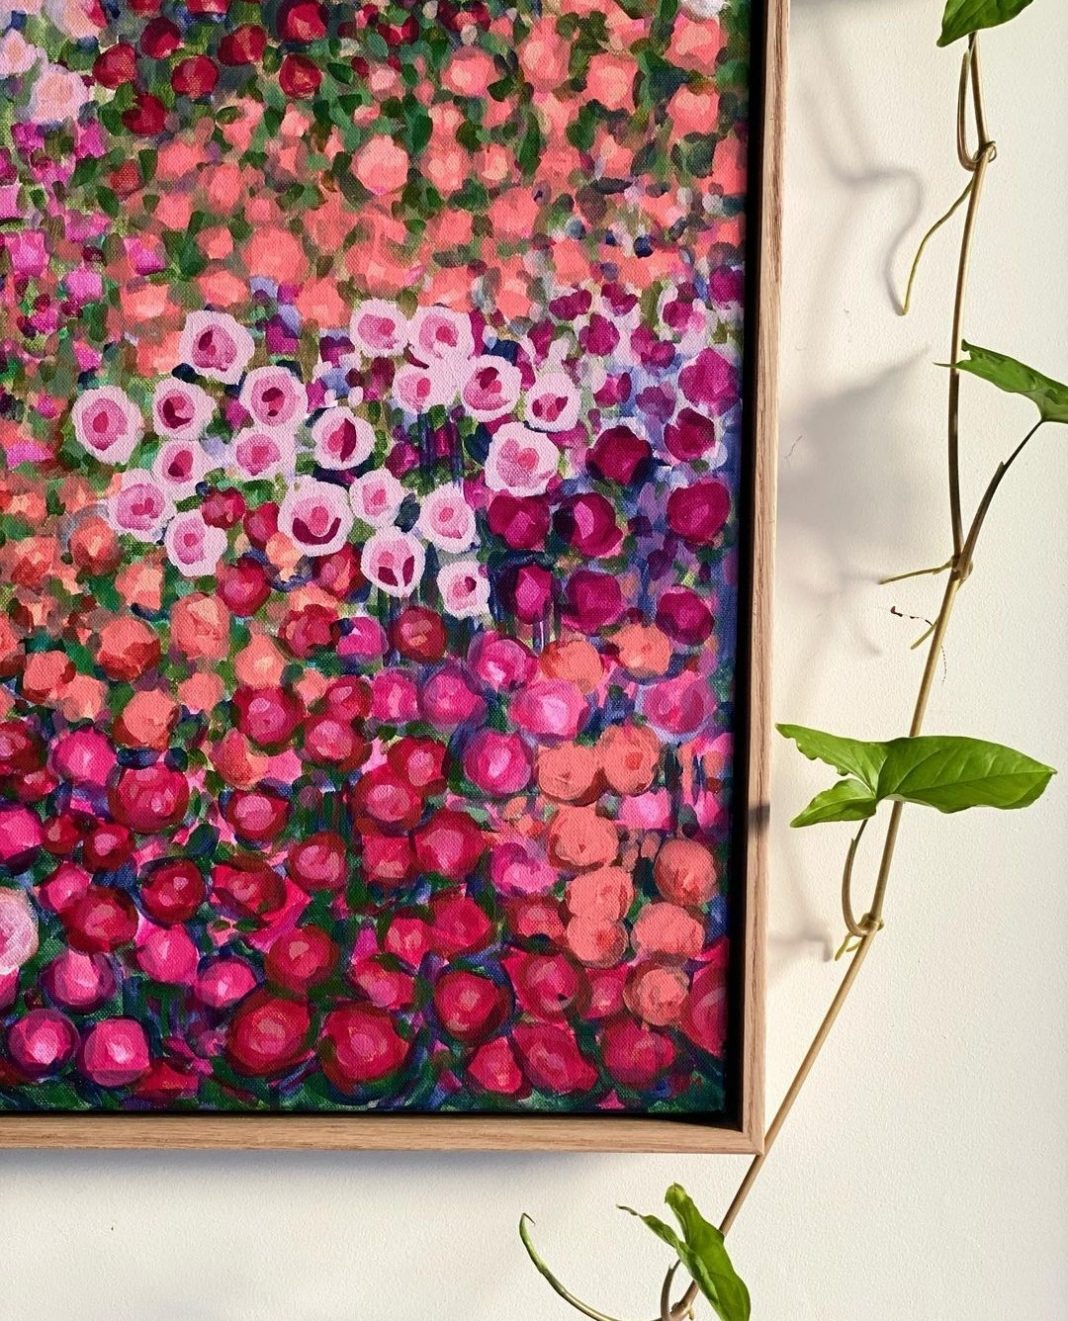 Escape to a floral wonderland with art by Sam Matthews | Style Curator